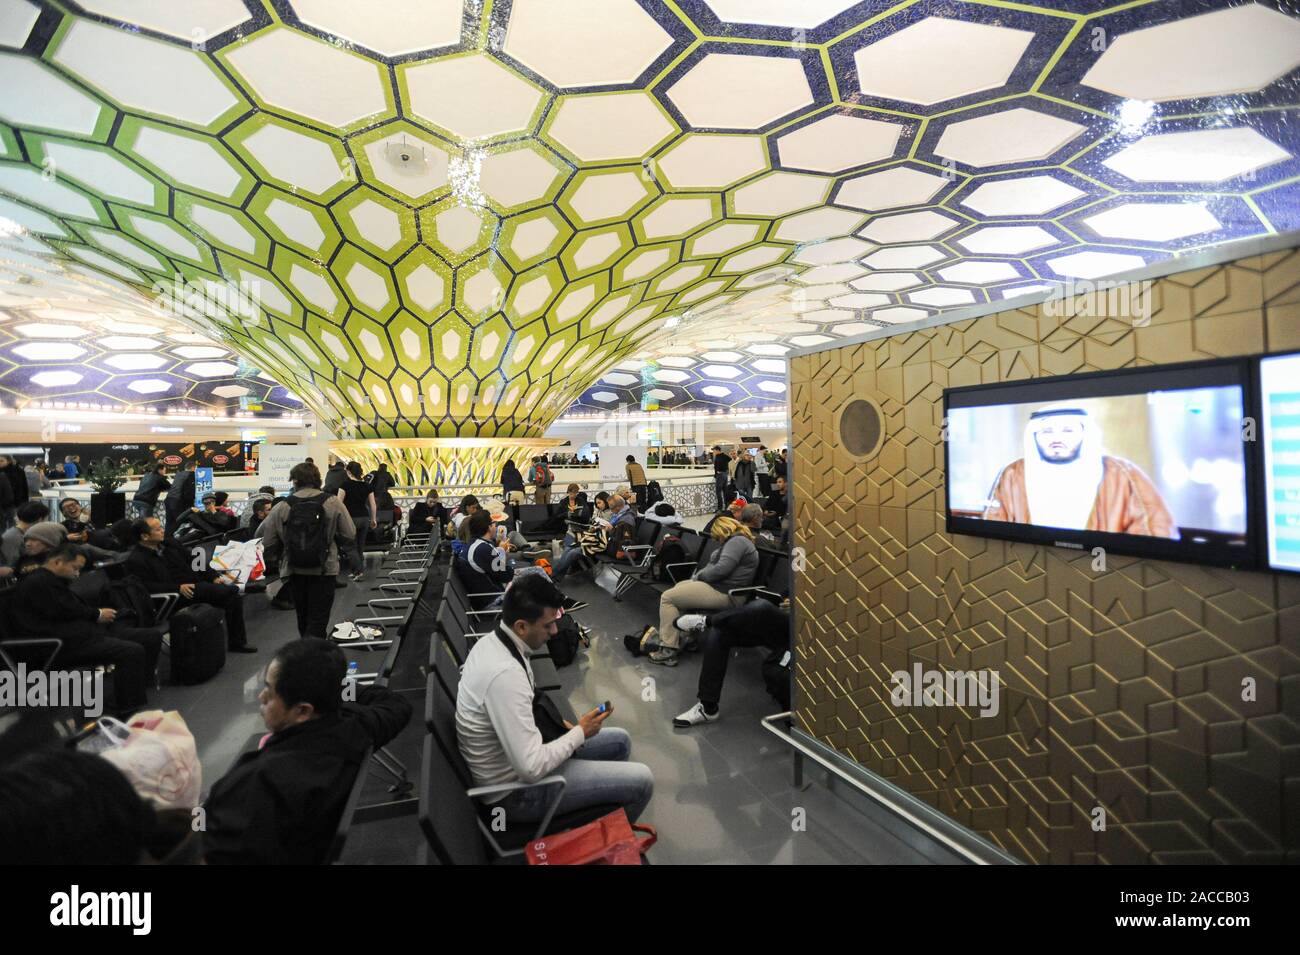 04.01.2014, Abu Dhabi, United Arab Emirates - Passengers wait for their connecting flights during a stopover in the transit hall inside the terminal. Stock Photo